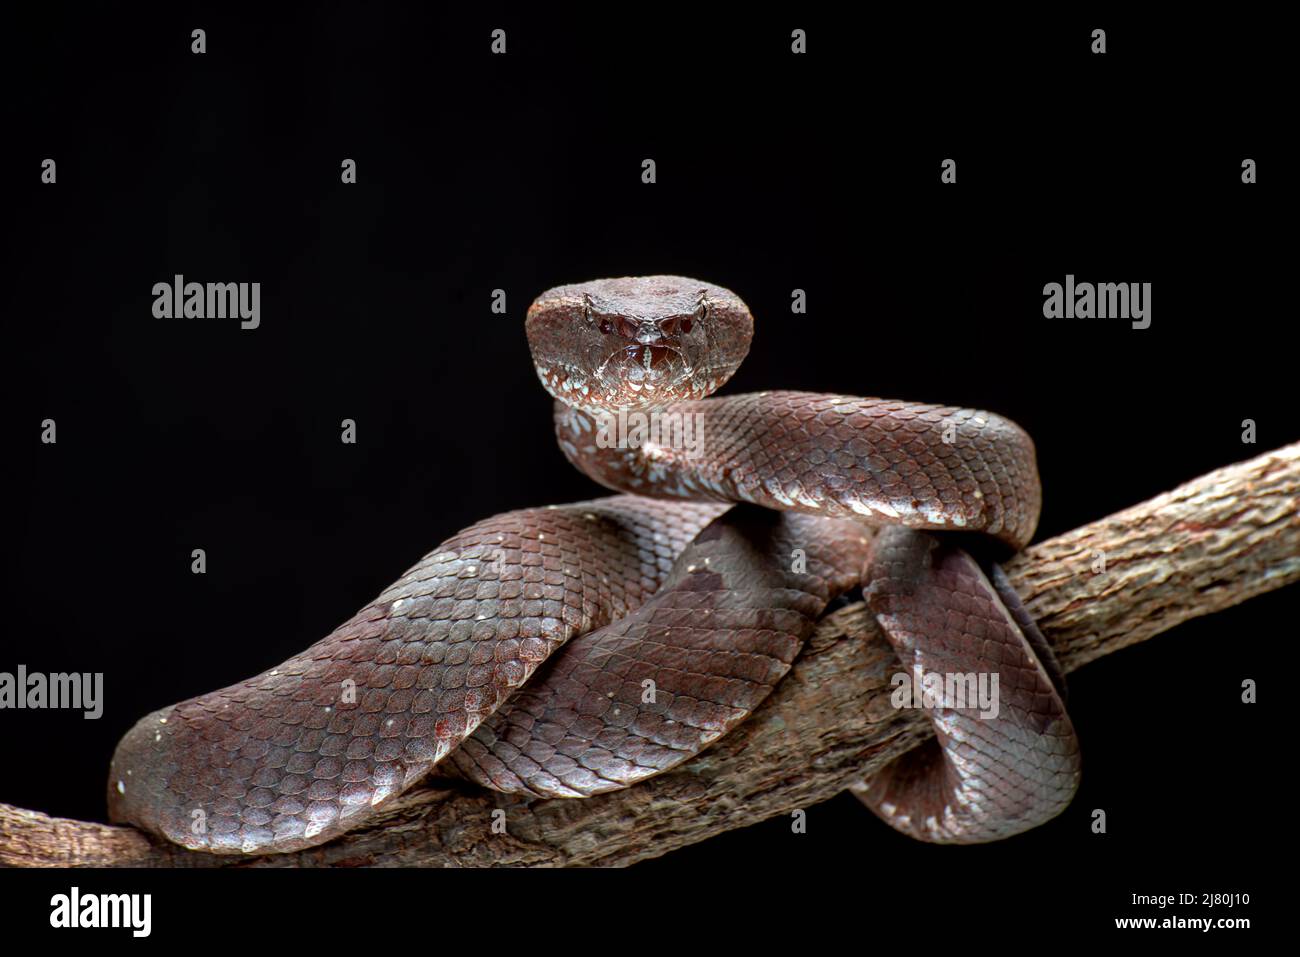 Flat-nosed pit viper on a branch, Indonesia Stock Photo